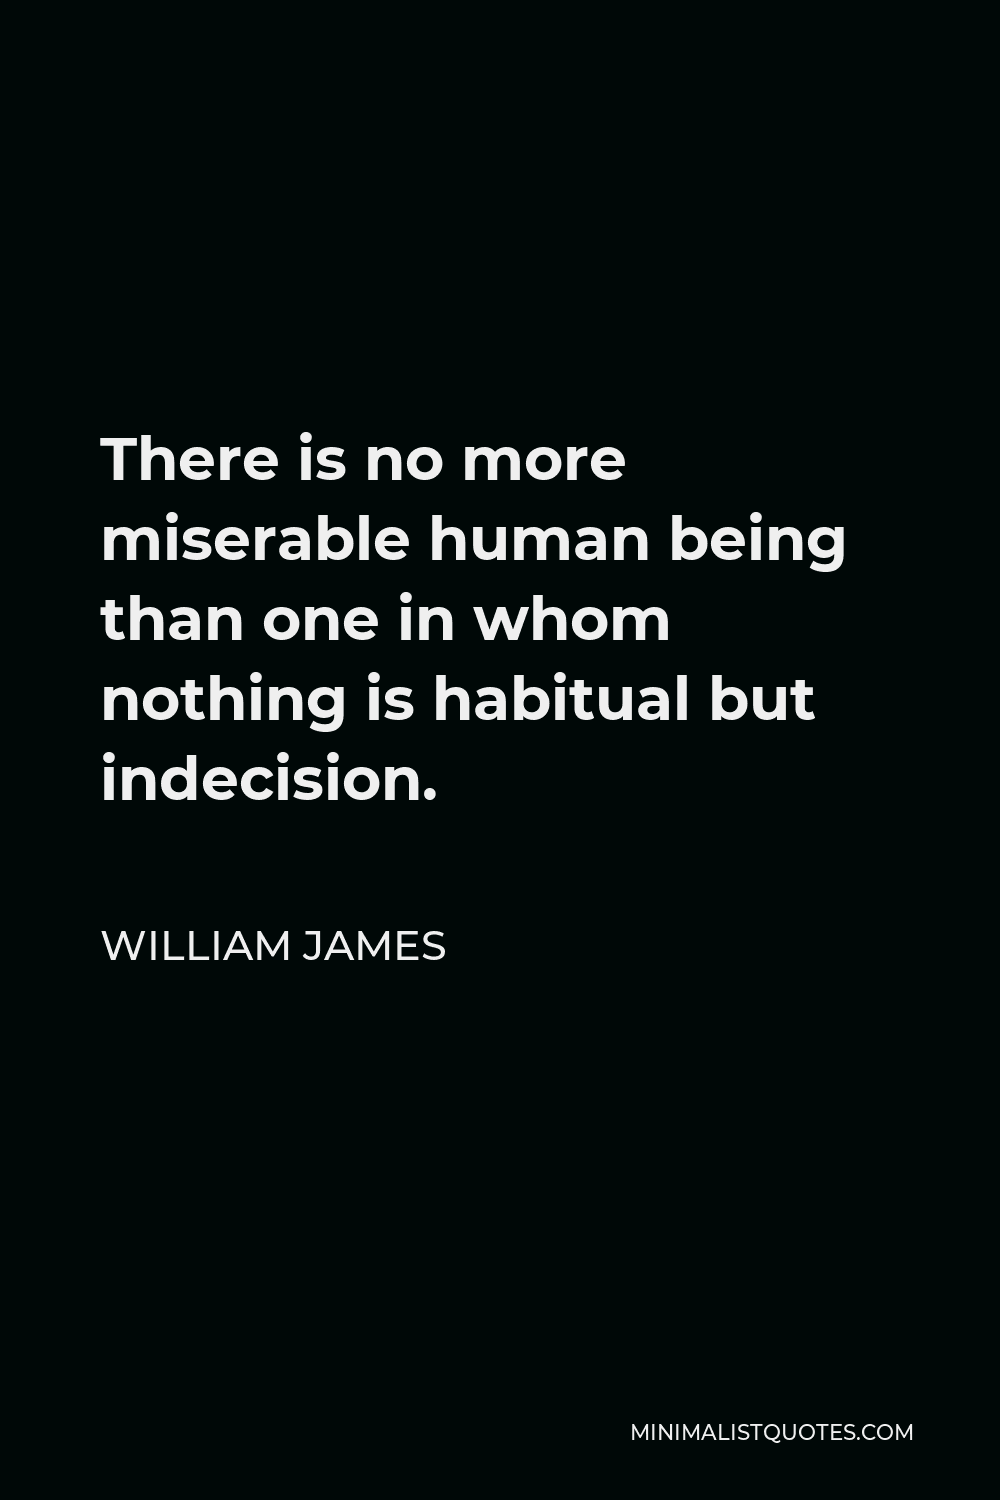 William James Quote - There is no more miserable human being than one in whom nothing is habitual but indecision.